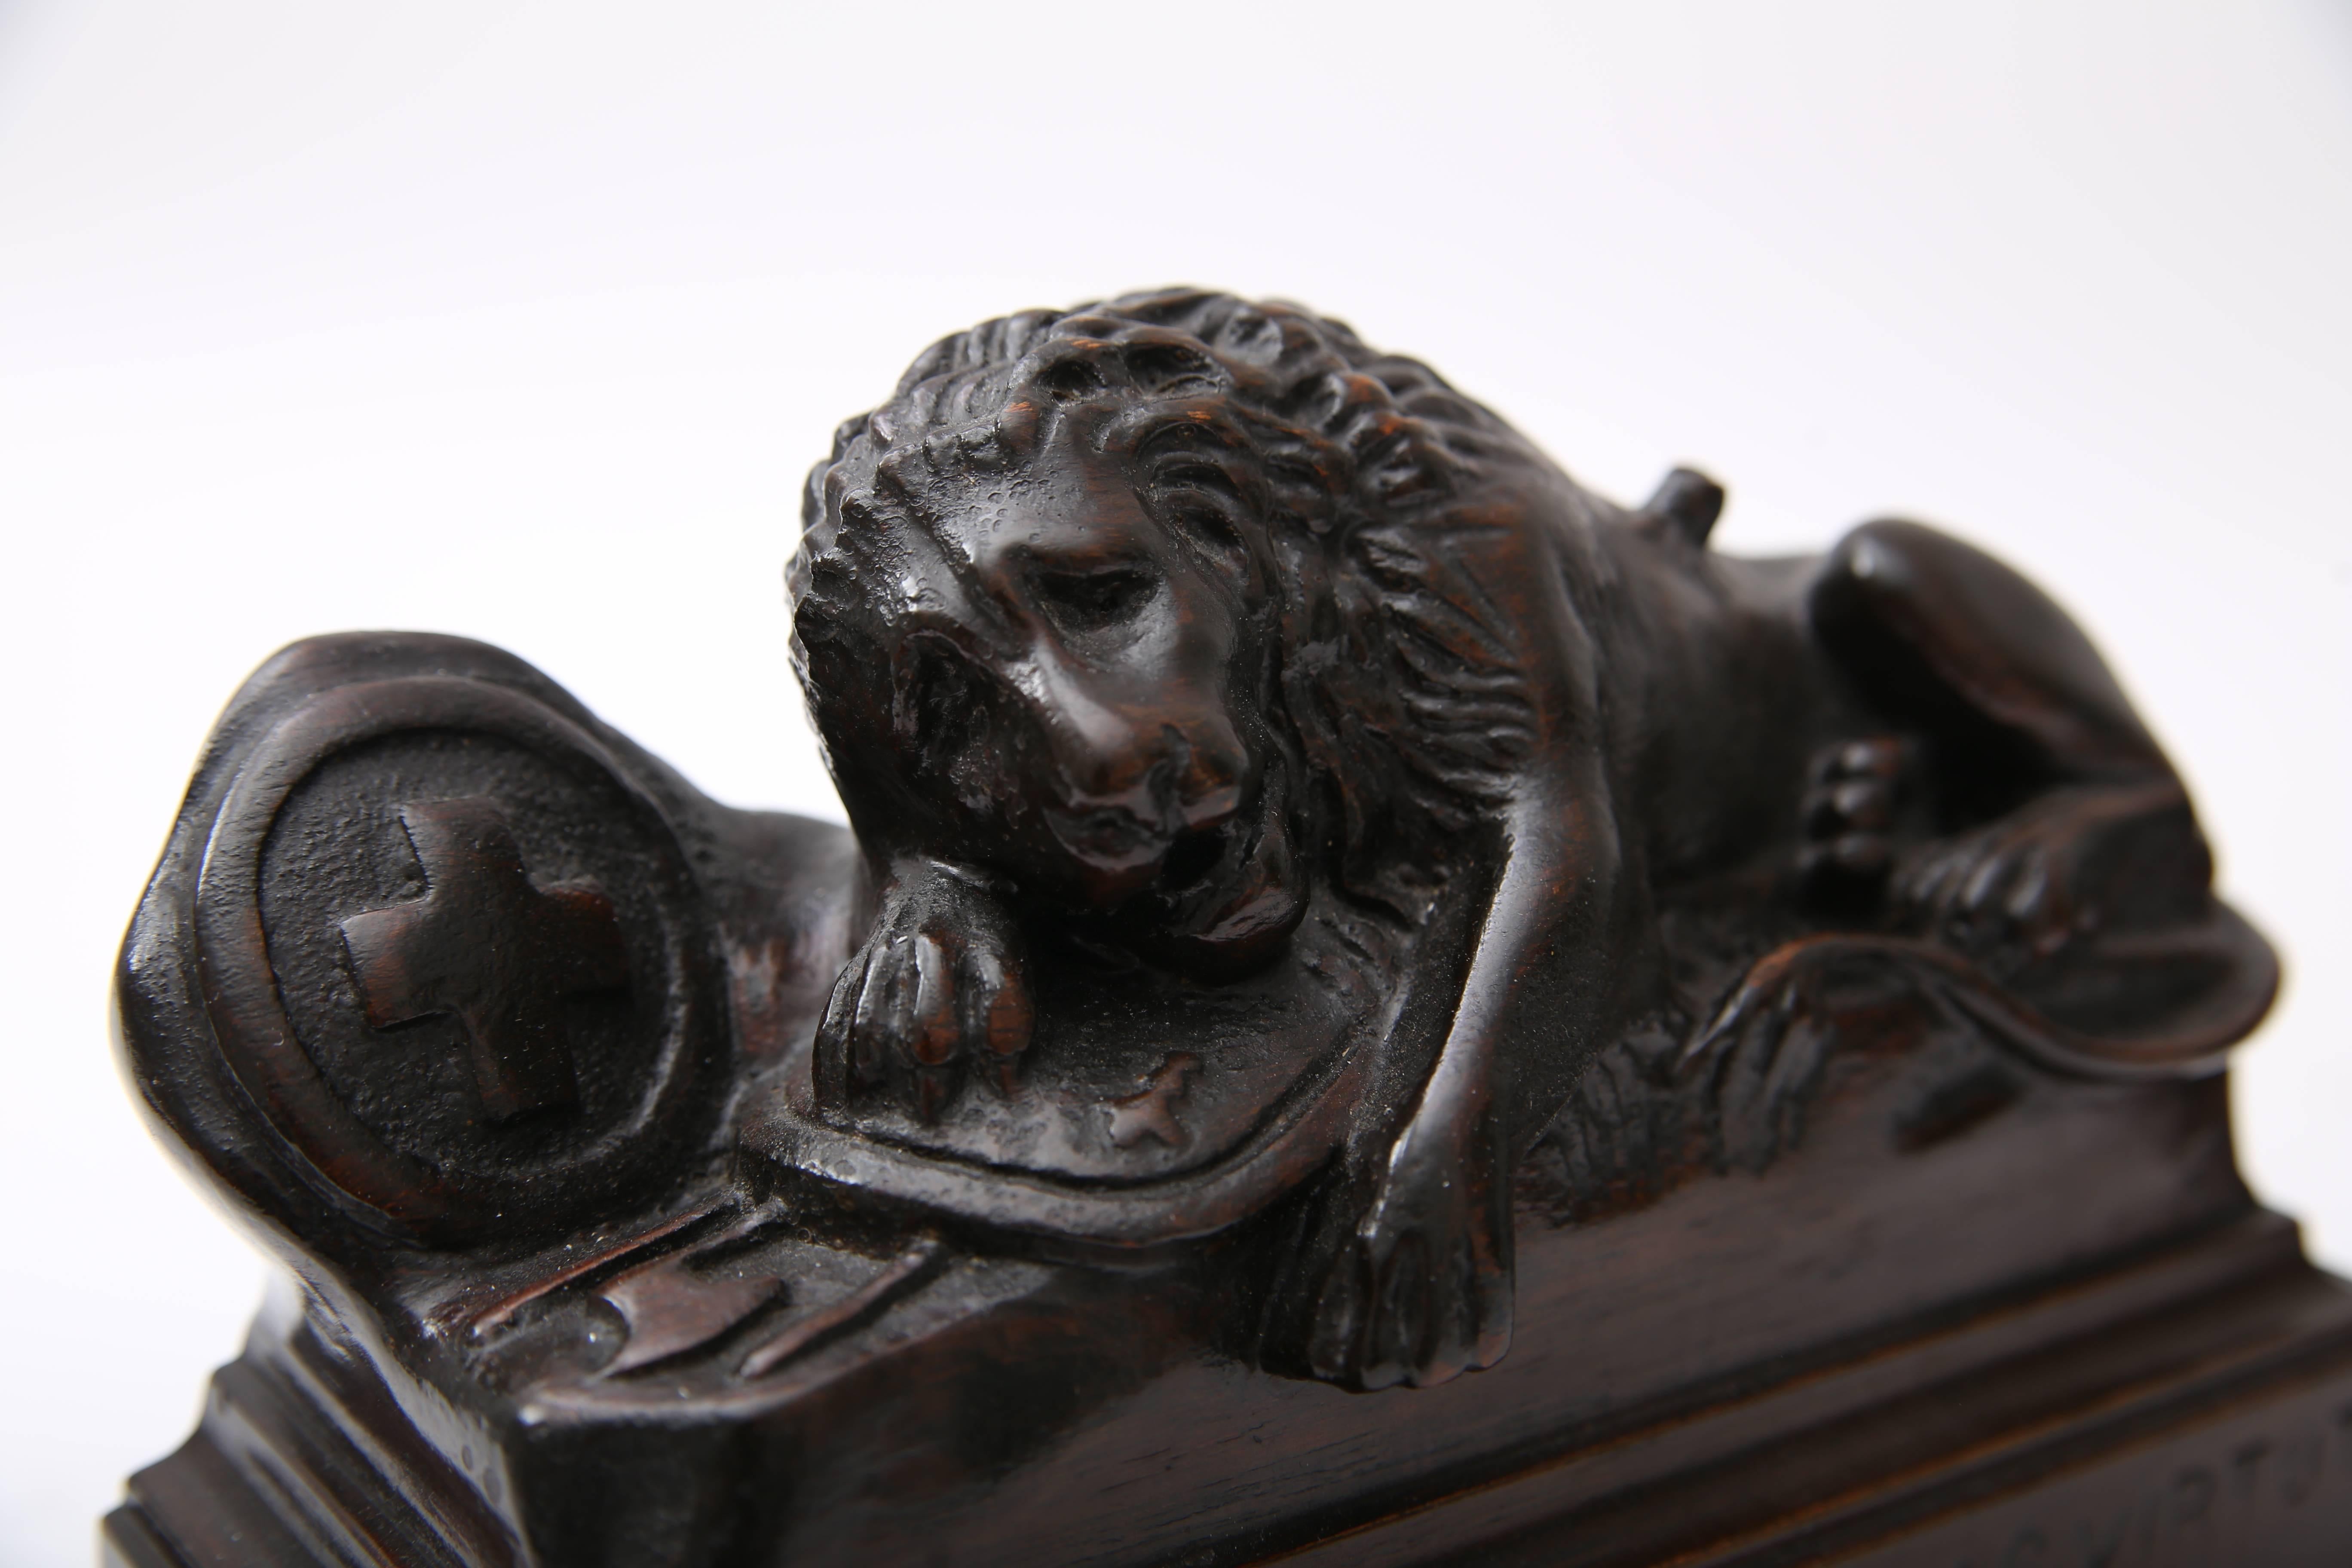 Hand-Carved Pair of Carved Wood Book Ends Depicting the Swiss Guard Lions of Lucerne, France